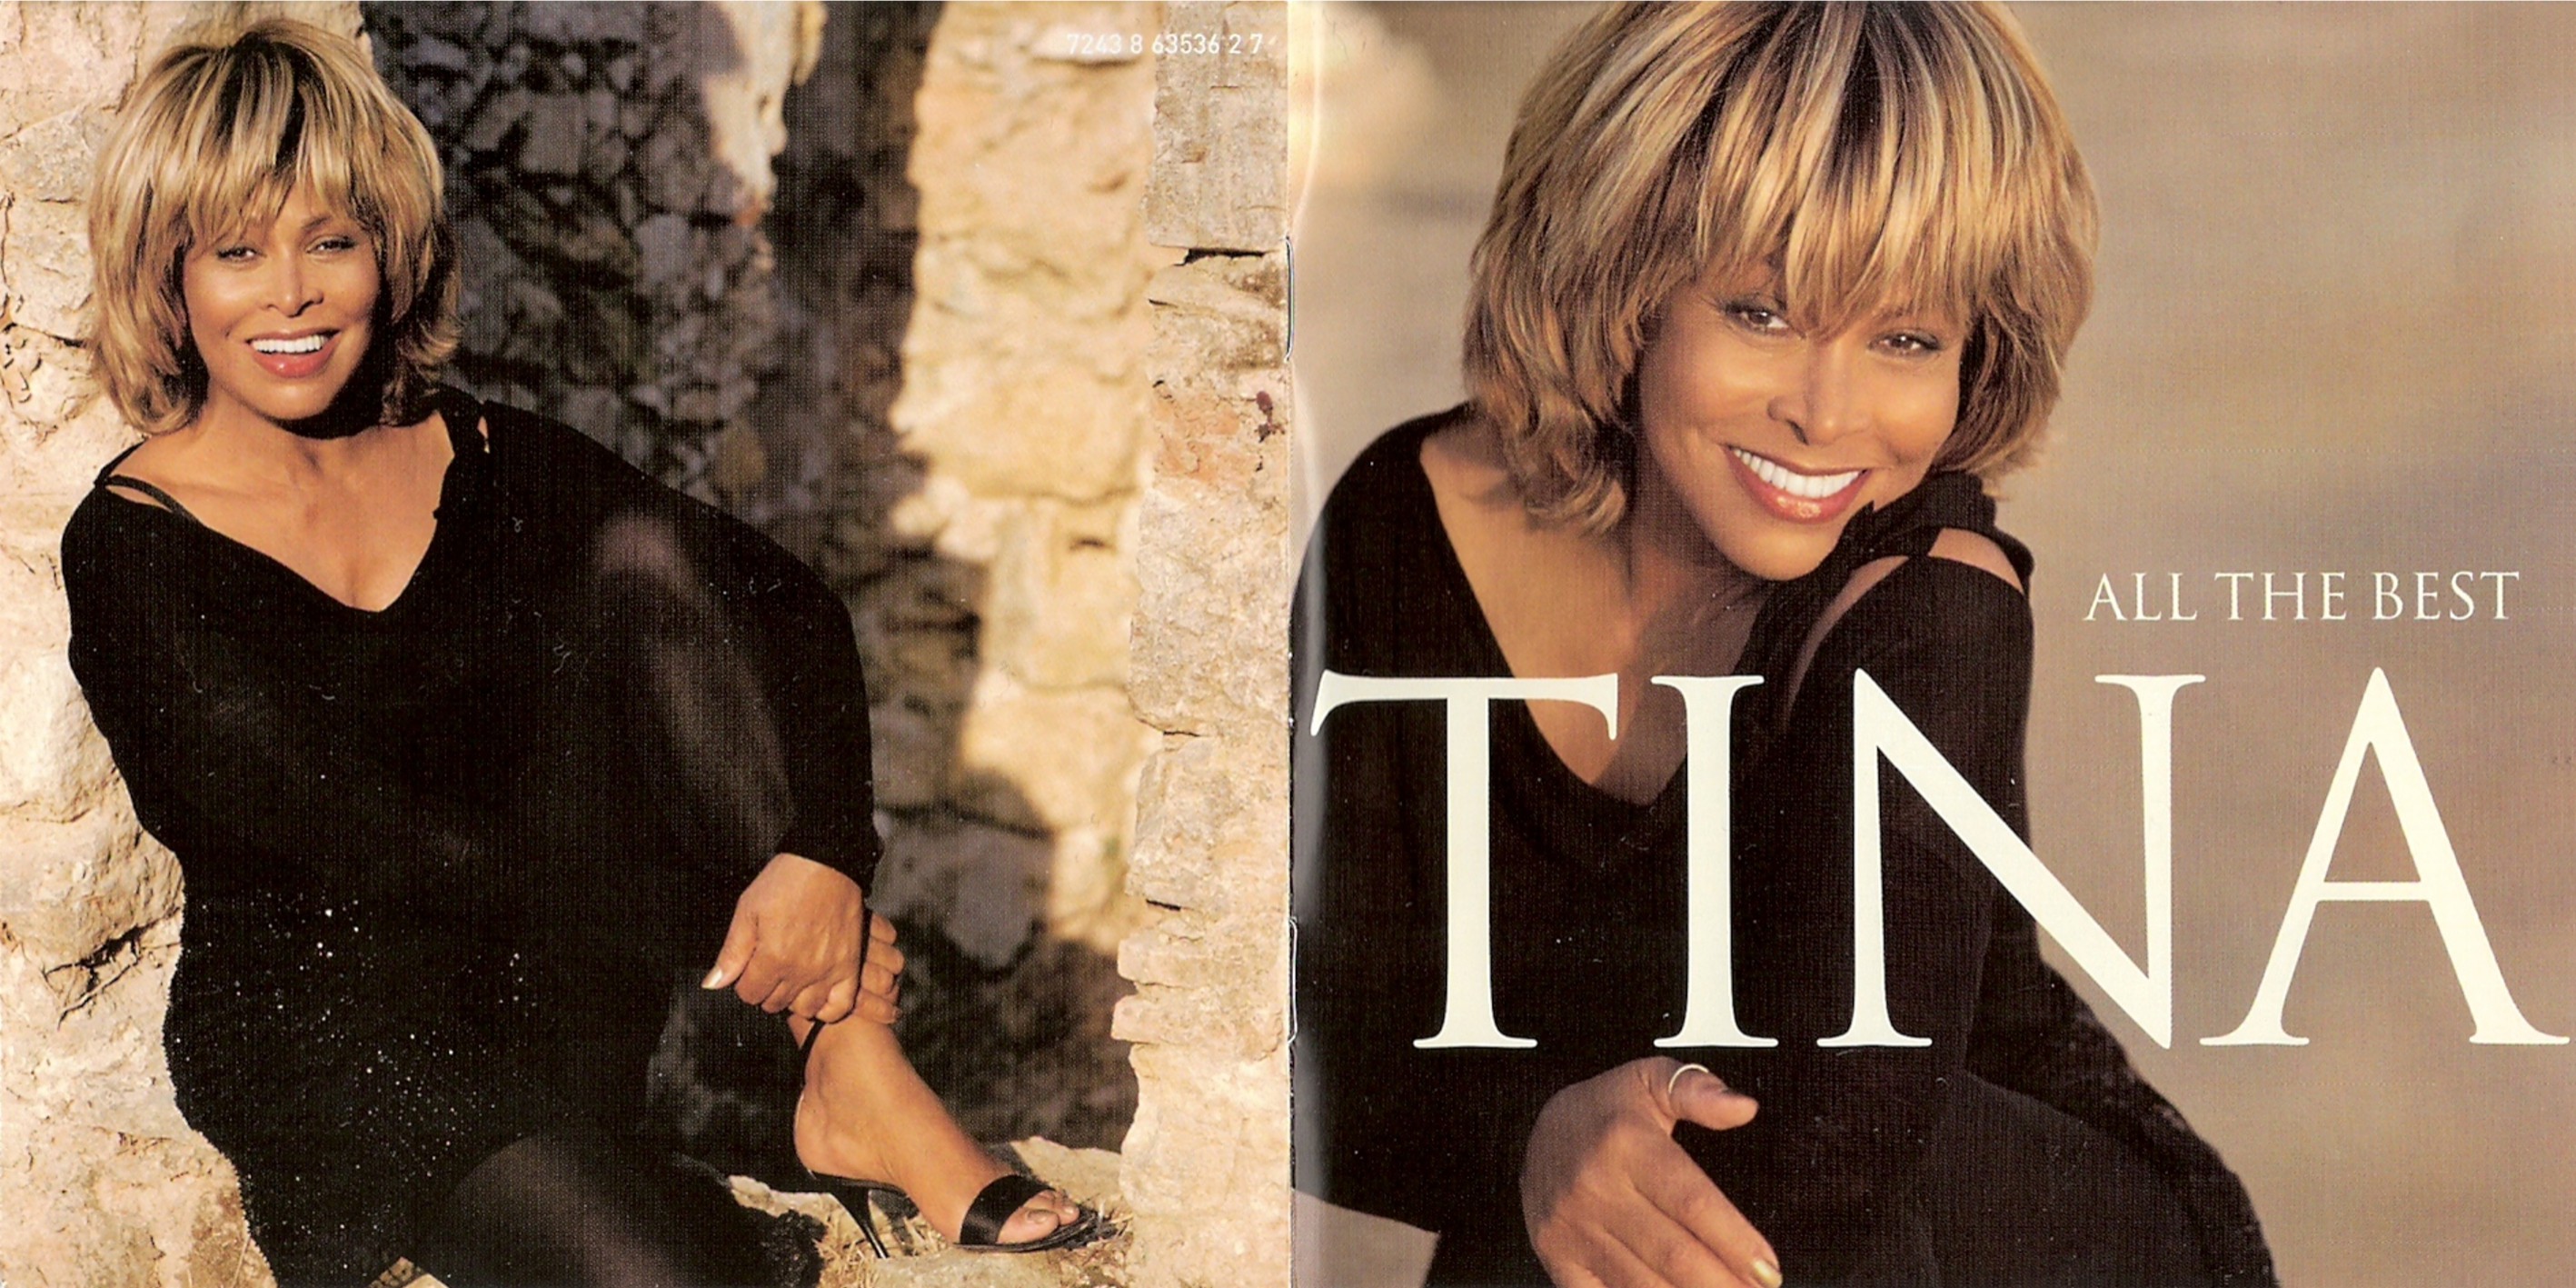 Tina Turner All The Best booklet1.jpg.